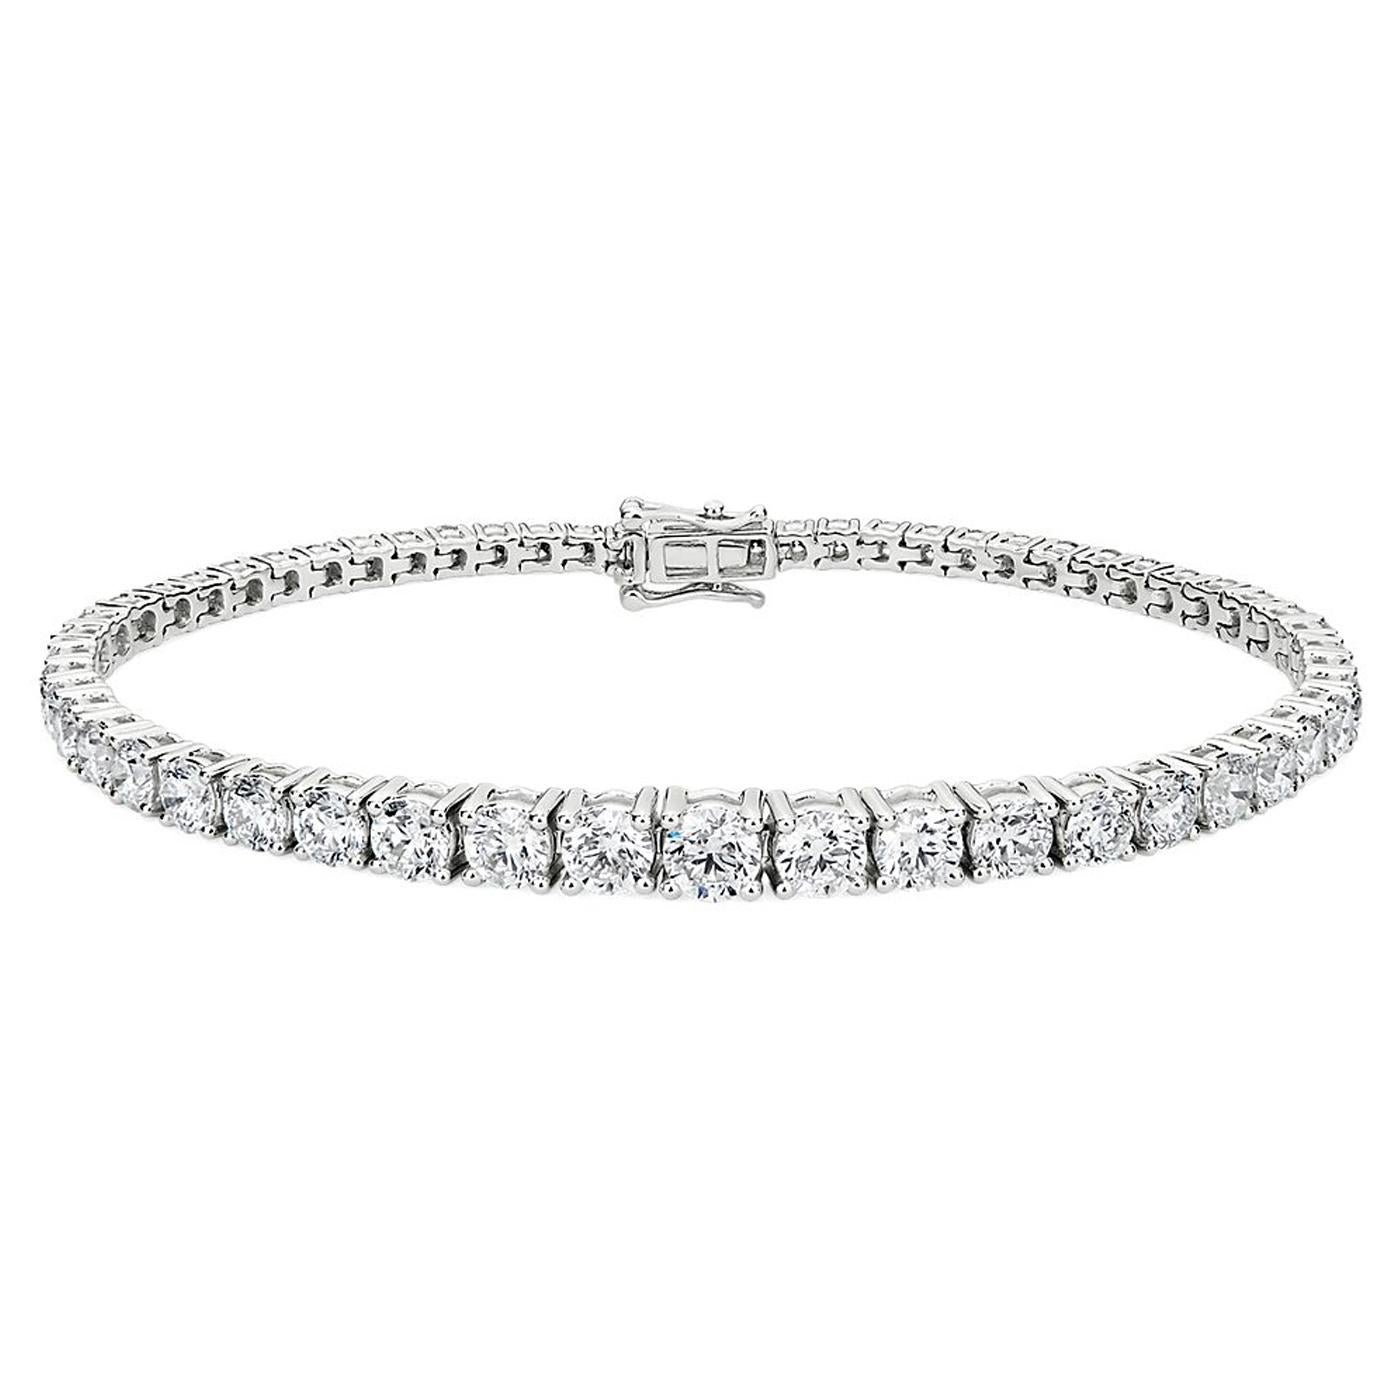 The elegance of this stunning 18K white gold tennis bracelet features round-cut diamonds placed in a 4-prong setting for a sturdy and balanced look that's sure to catch the eye. Classic style & intricate workmanship makes this bracelet a true